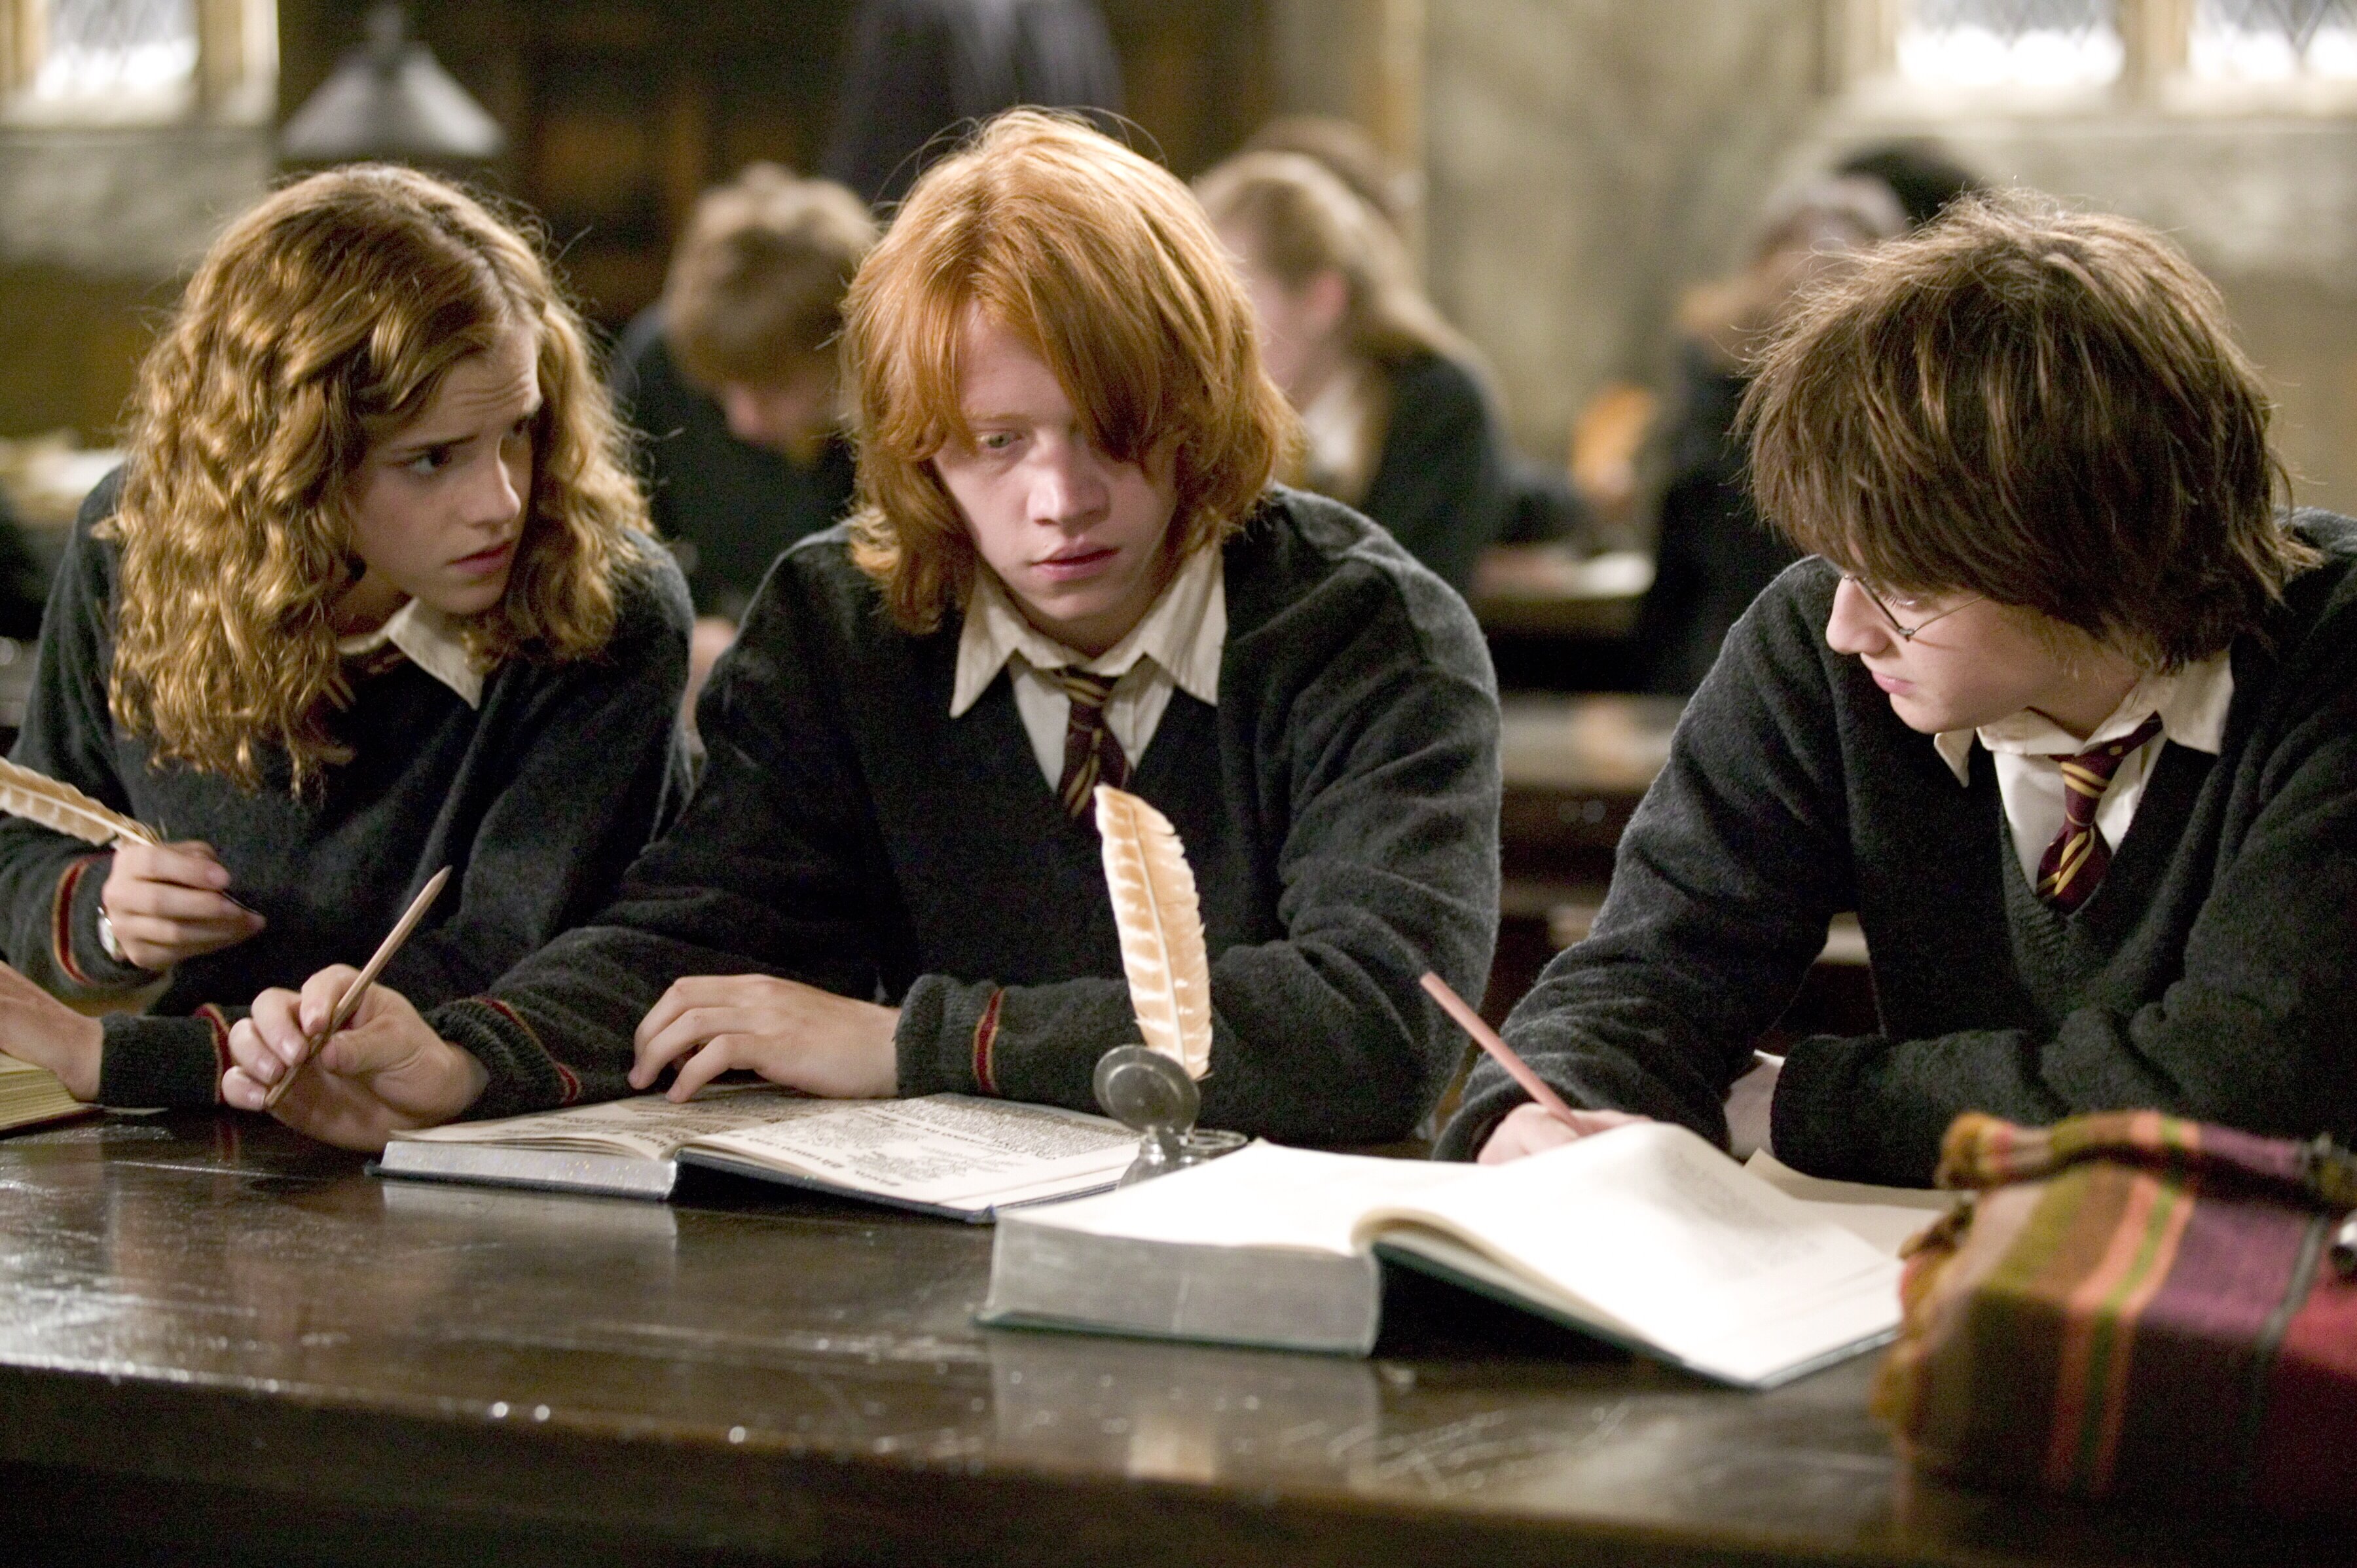 harry potter, movie, harry potter and the goblet of fire, daniel radcliffe, emma watson, hermione granger, ron weasley, rupert grint